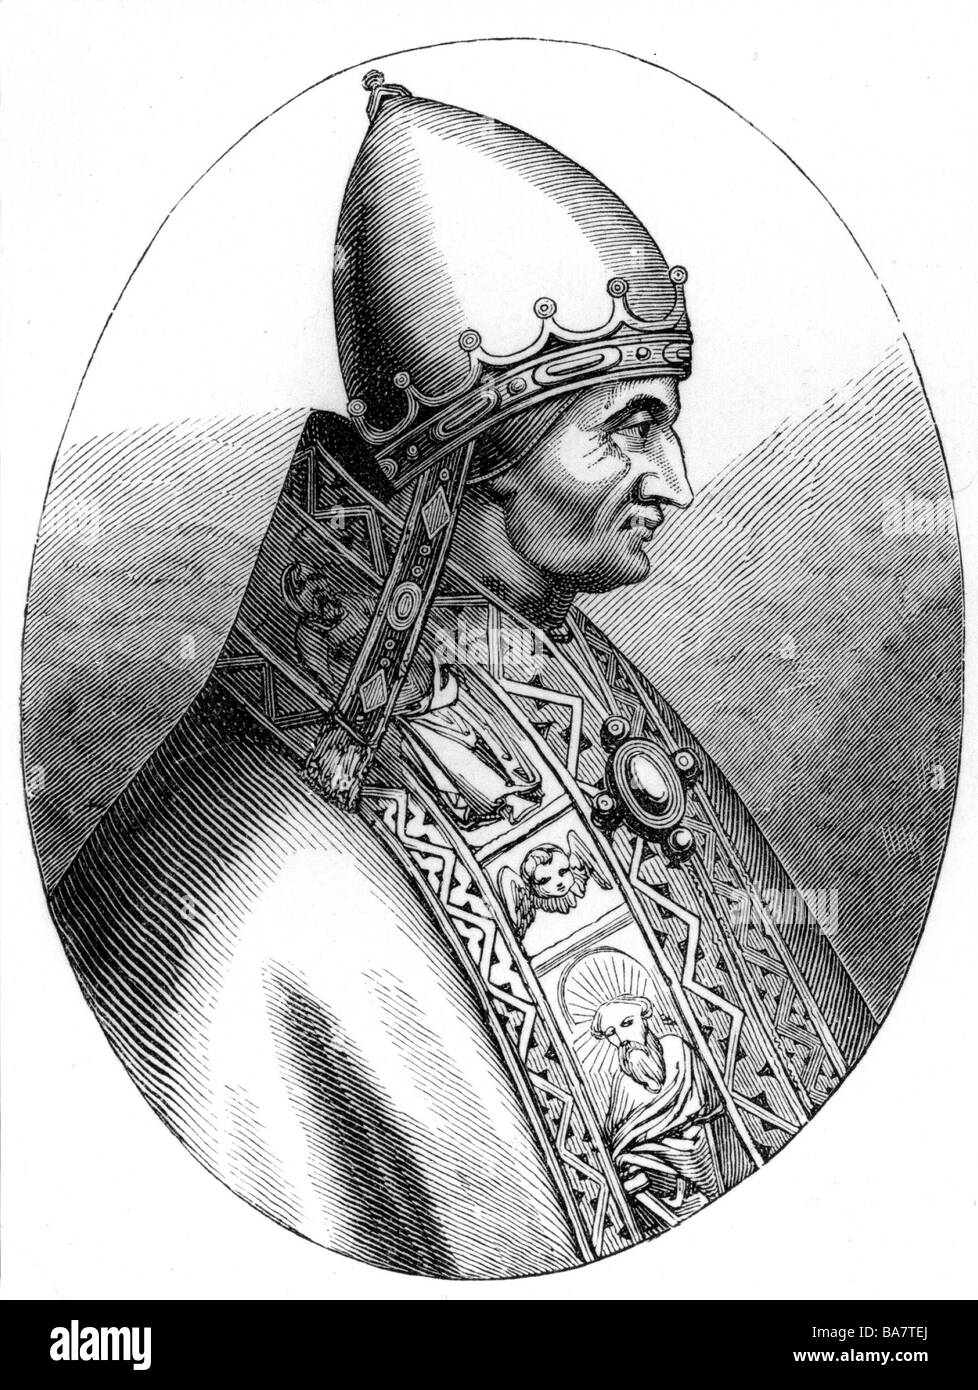 Innocent IV (Sinibaldo Fieschi), circa 1195 - 7.12.1254, pope since 1243, portrait, side view, wood engraving, 19th century, after fresco from the Saint Paul Rome Stock Photo - Alamy